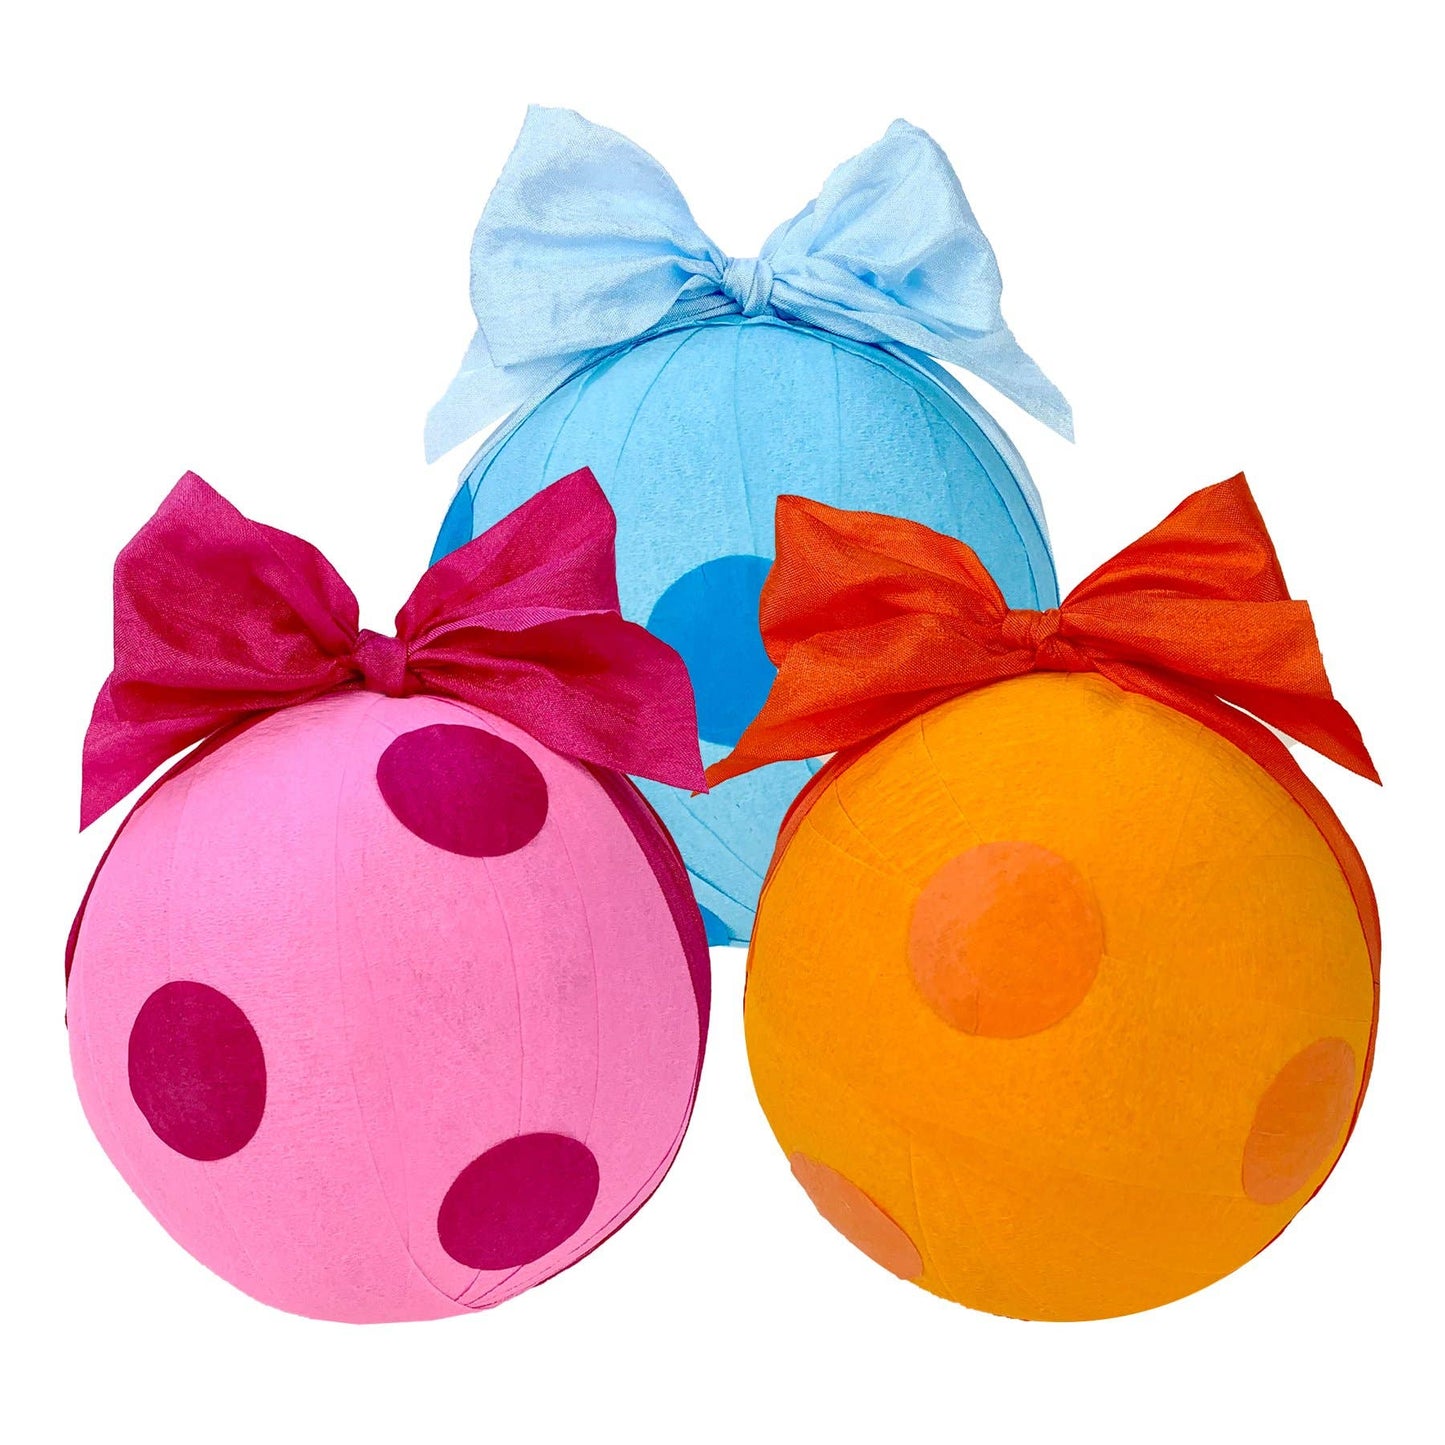 Deluxe Surprize Ball  - Polka Dot (Assorted Colors)